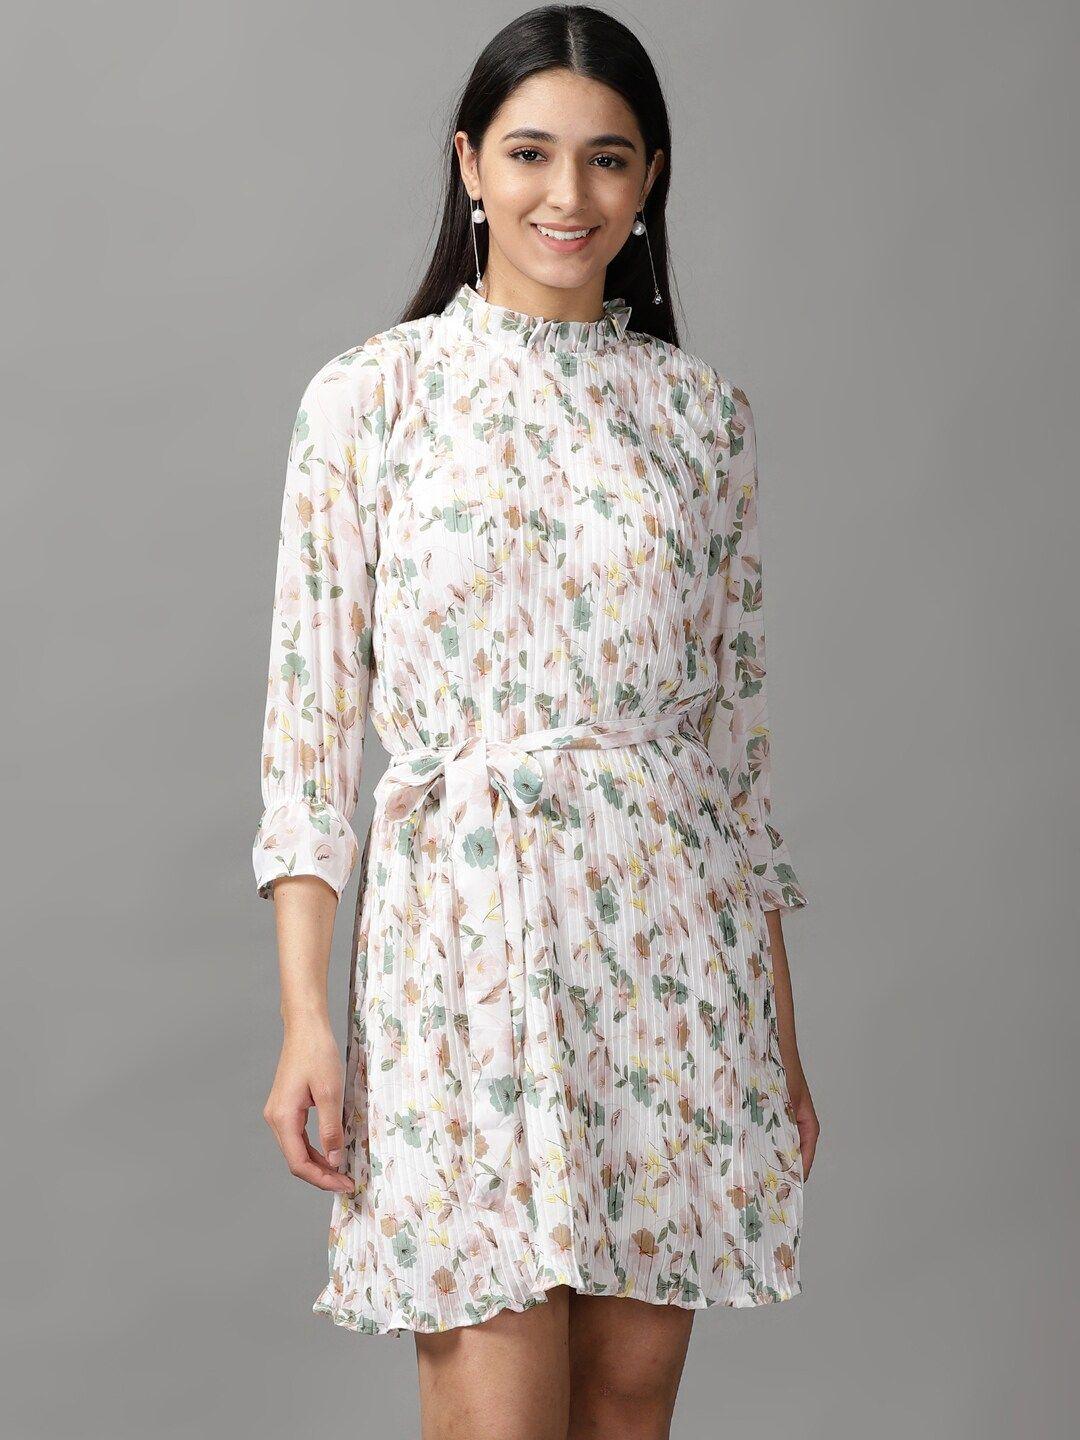 showoff women white & green floral printed dress